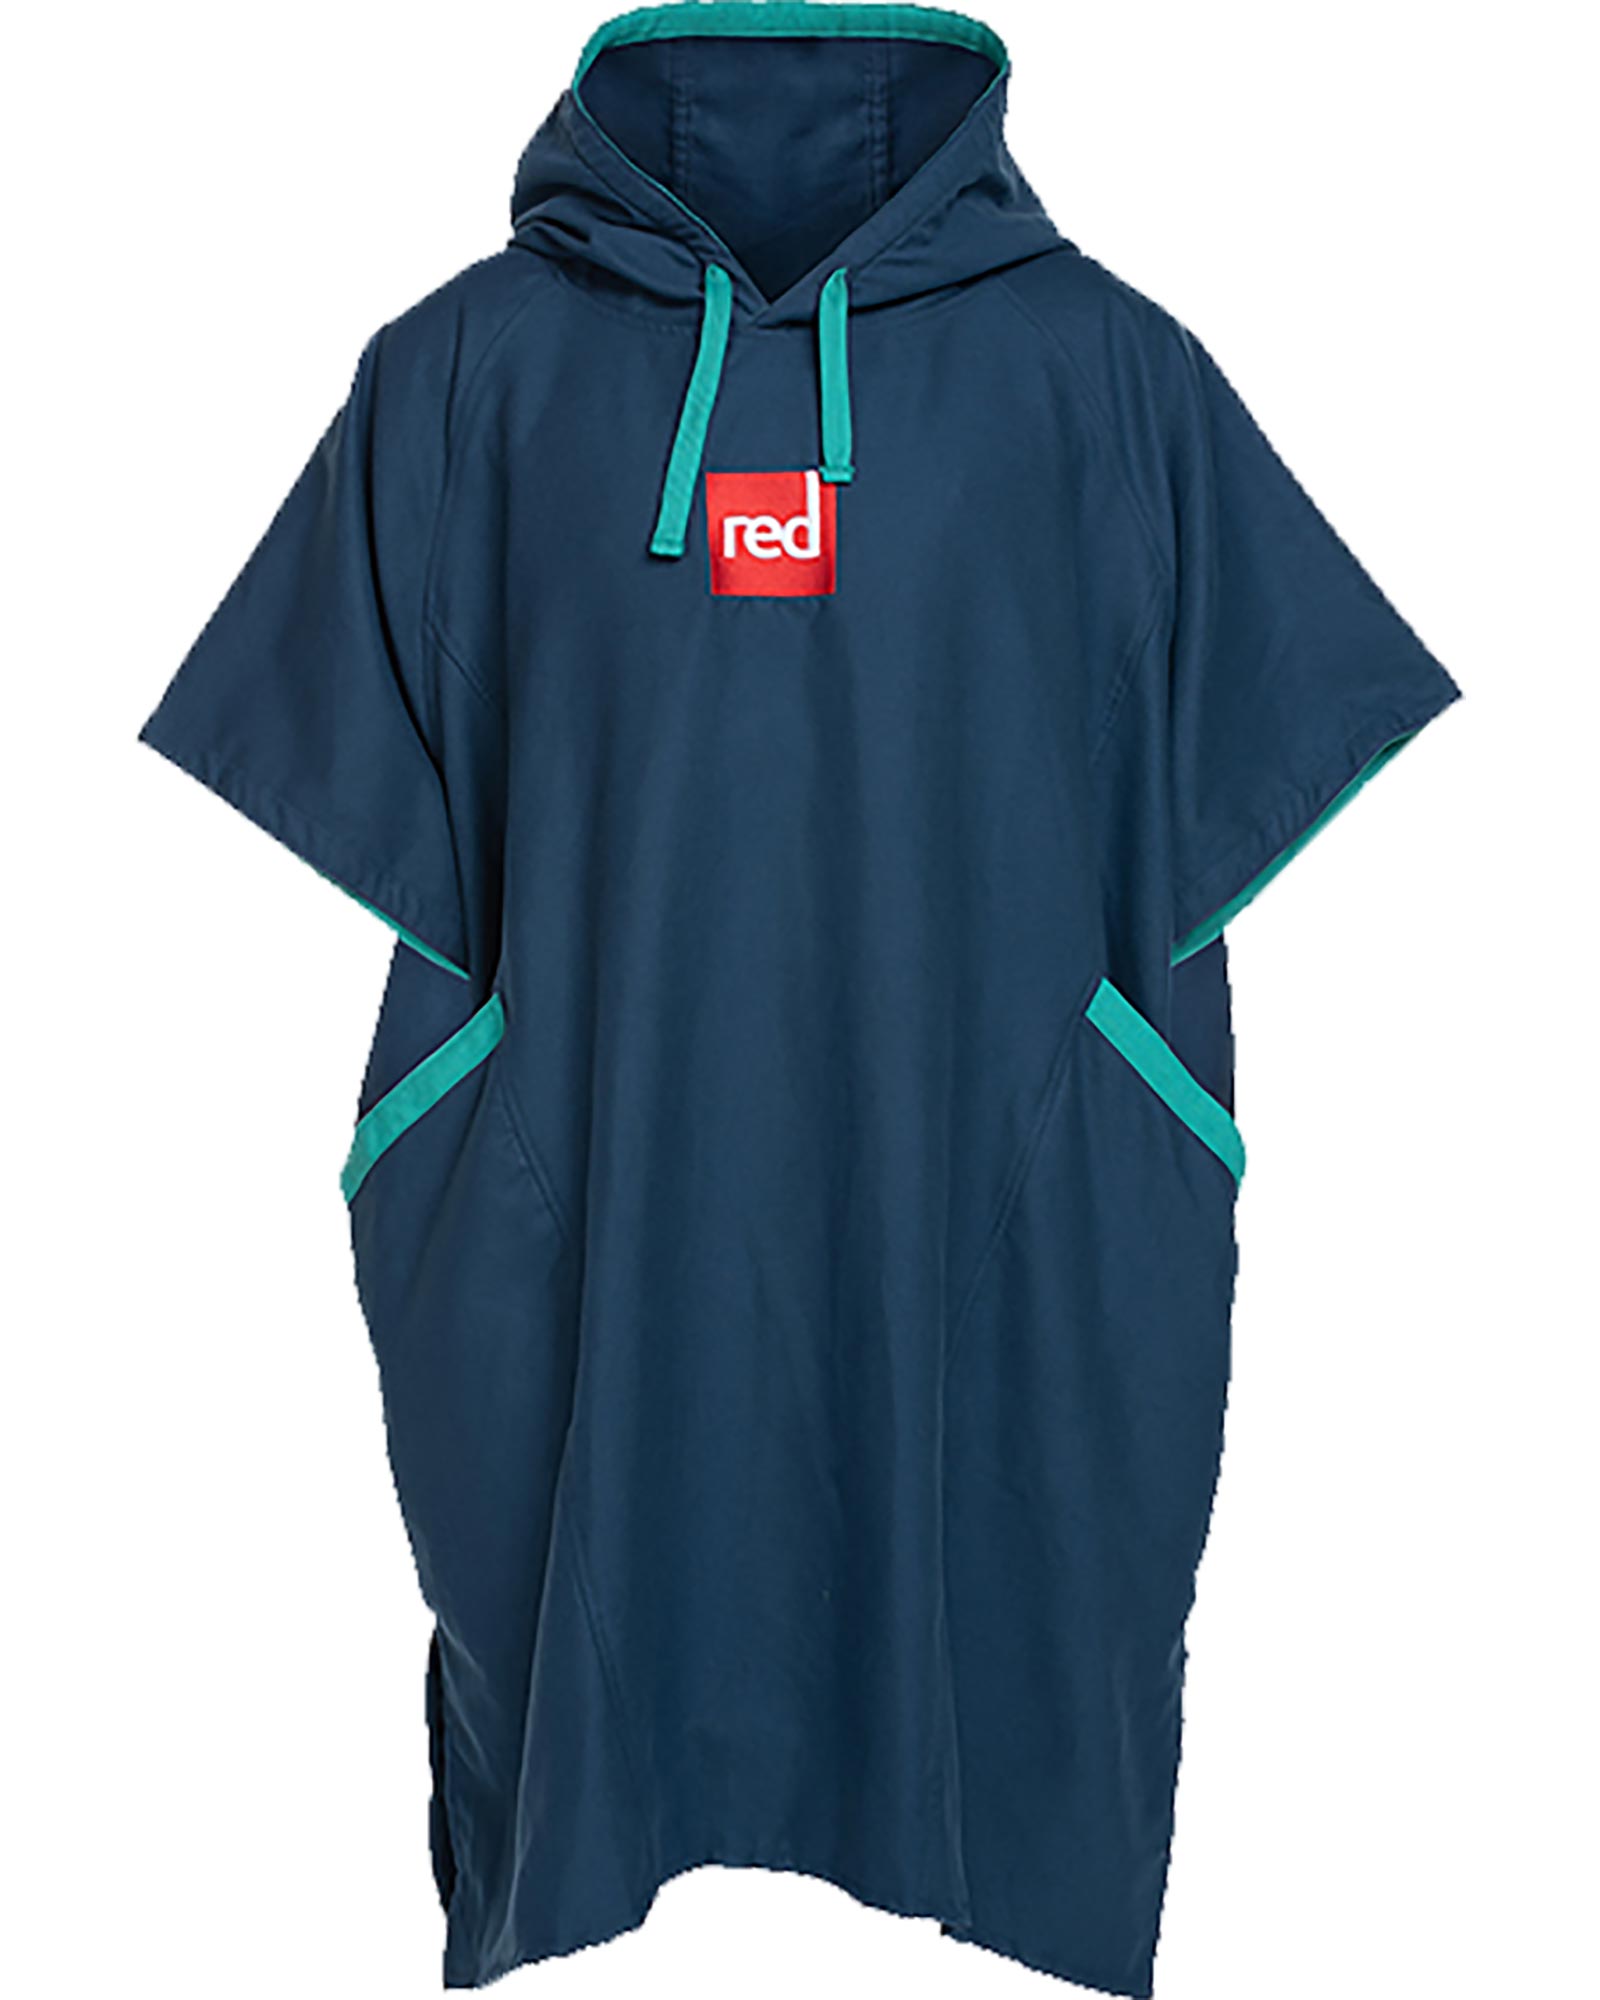 Red Quick Dry Change Robe - Blue L